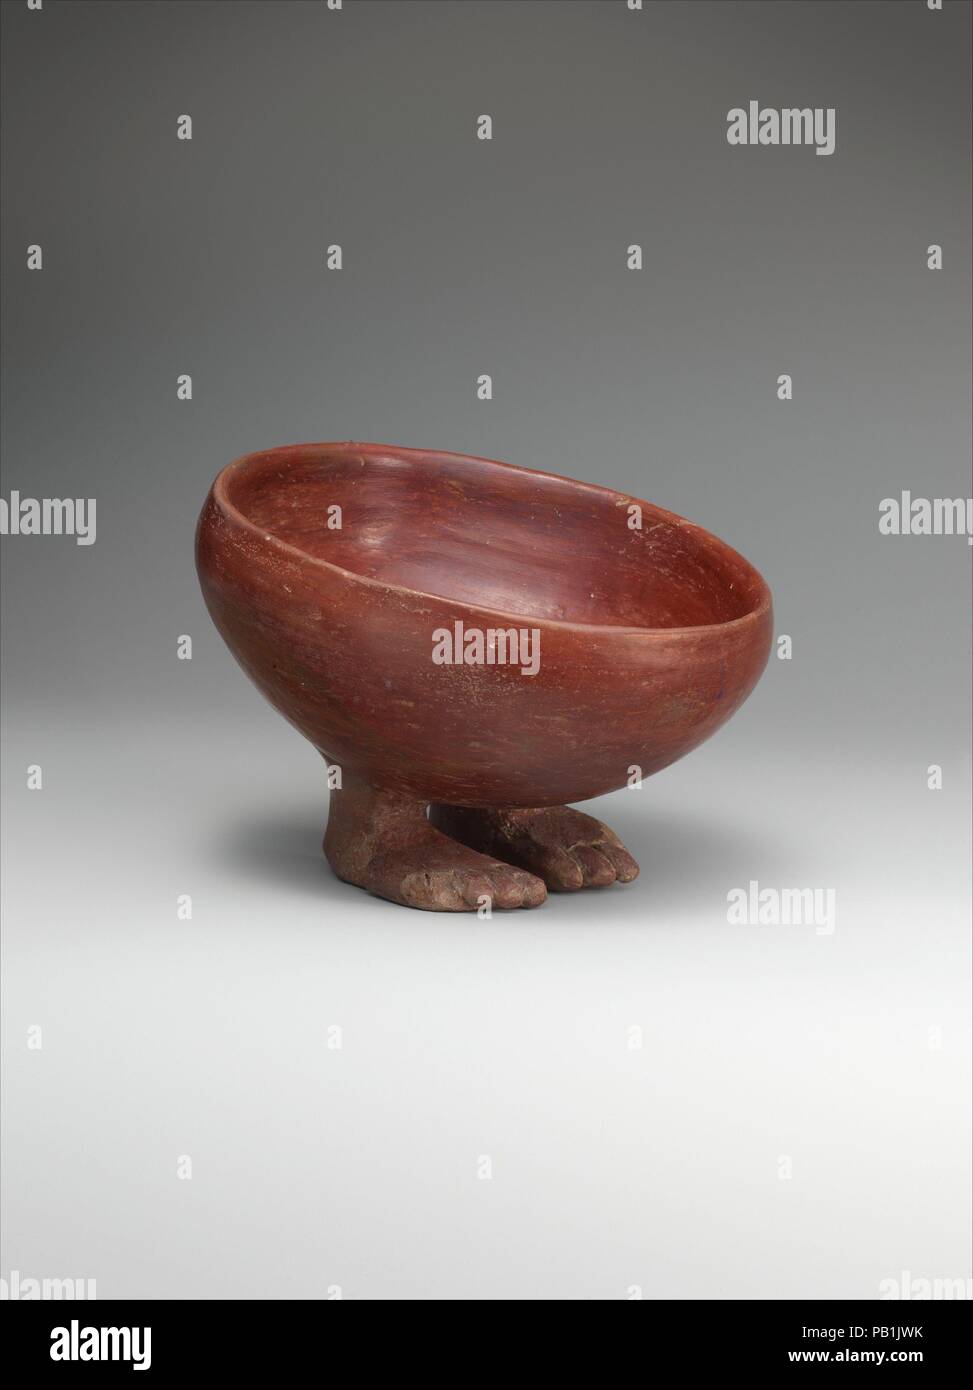 Bowl with Human Feet. Dimensions: diam. 13.2 x W. 13.7 x D. 9.8 cm (5 3/16 x 5 3/8 x 3 7/8 in.). Date: ca. 3900-3650 B.C..  In the Predynastic Period, potters created a wide variety of ceramic vessels. One unusual type is a bowl with supports shaped like human feet. This simple, round bowl, tipped slightly forward as if to offer its contents, has two such feet solidly attached to its underside. Made from Nile clay, the bowl has a smoothed, slipped, and polished surface, giving it a light sheen. The bowl standing on feet is very similar in form to the Egyptian hieroglyph meaning 'to bring.' Sin Stock Photo